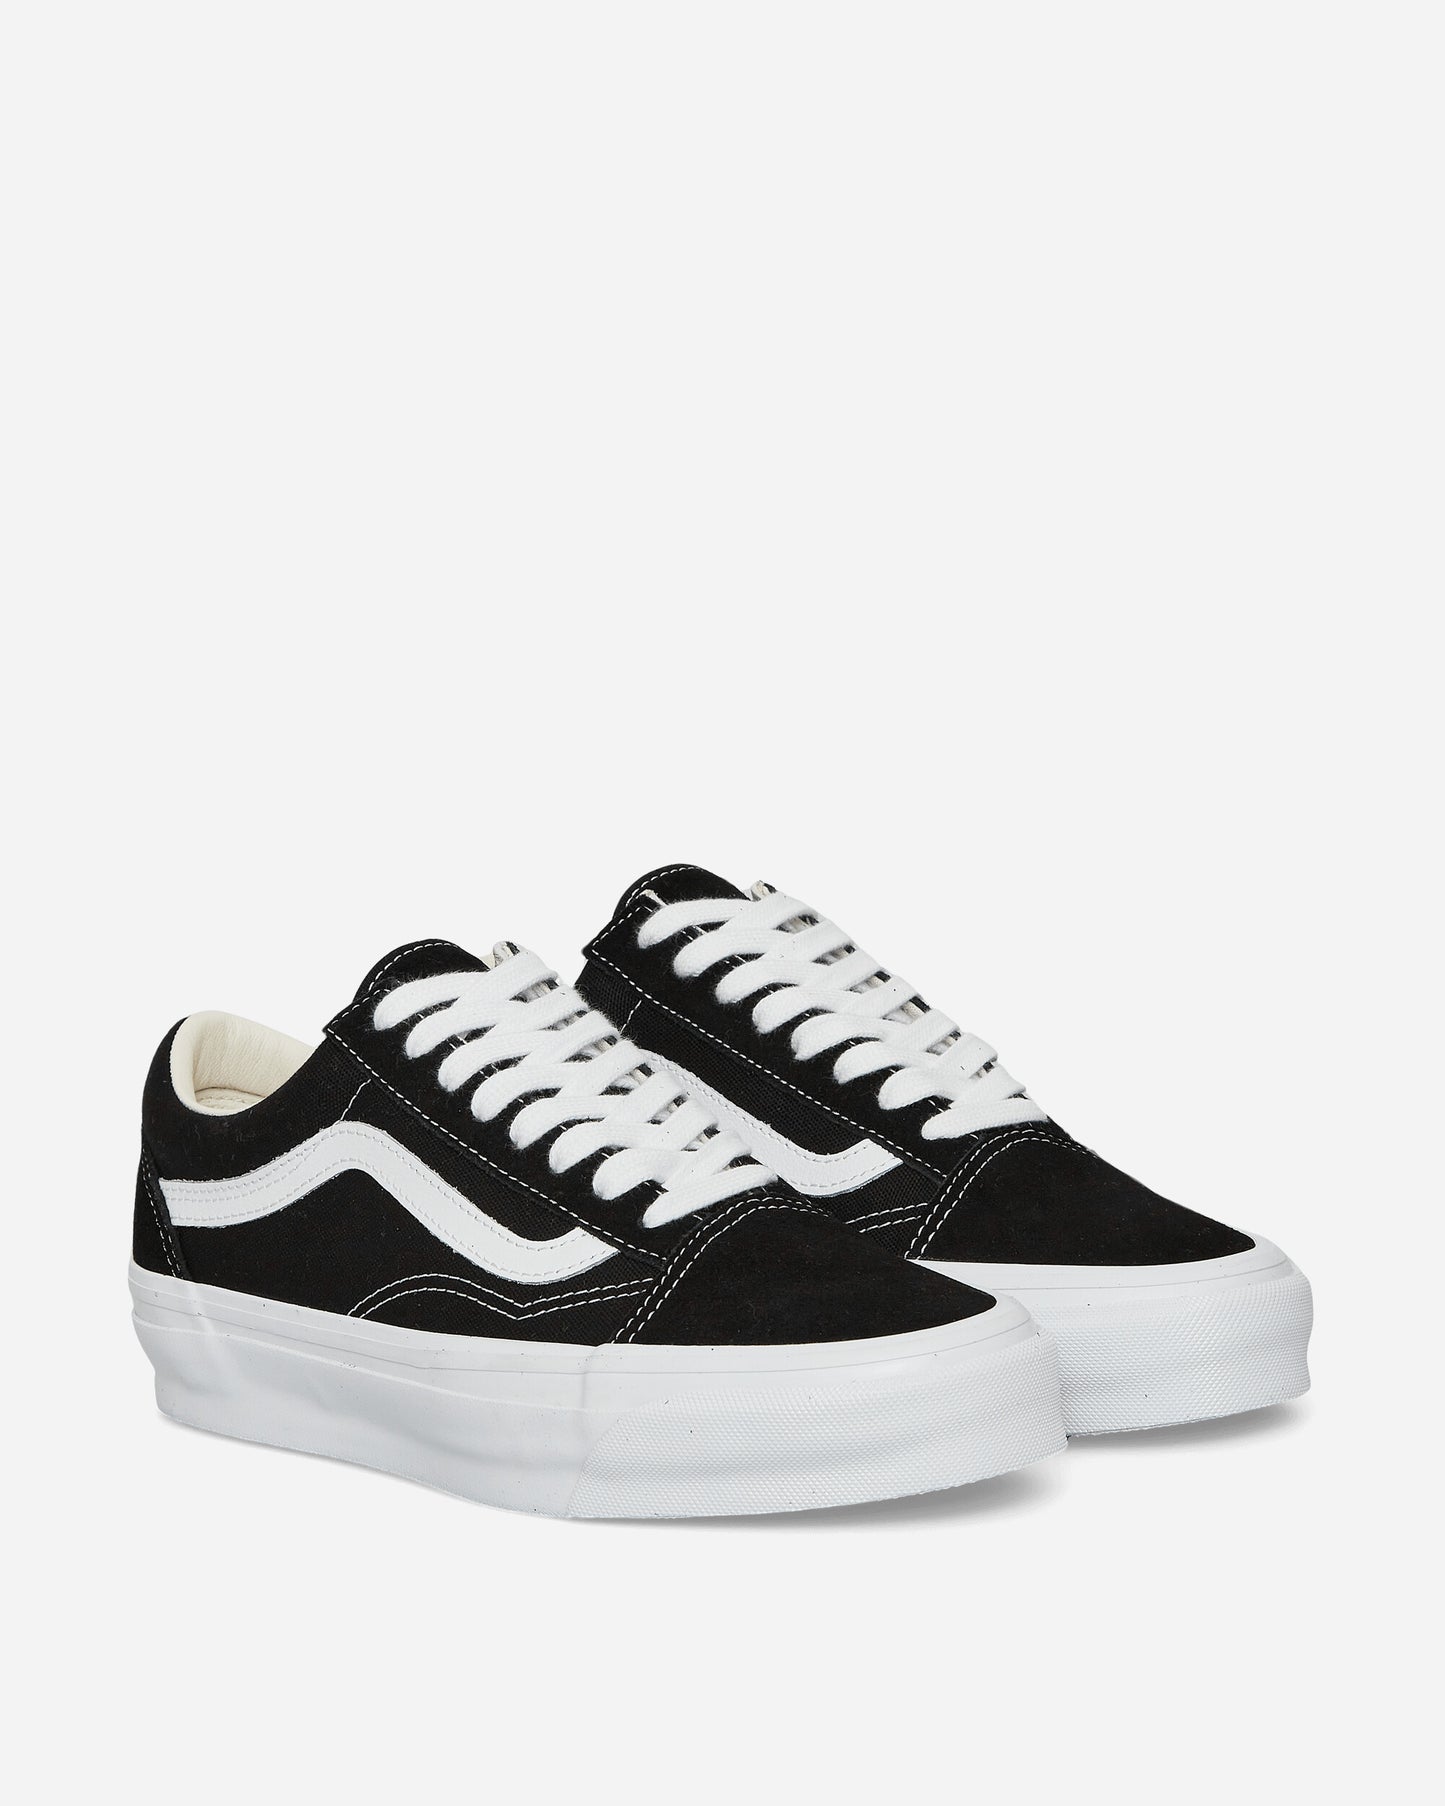 Vans Authentic Reissue 44 Black/White Sneakers Low VN000CQDBA21